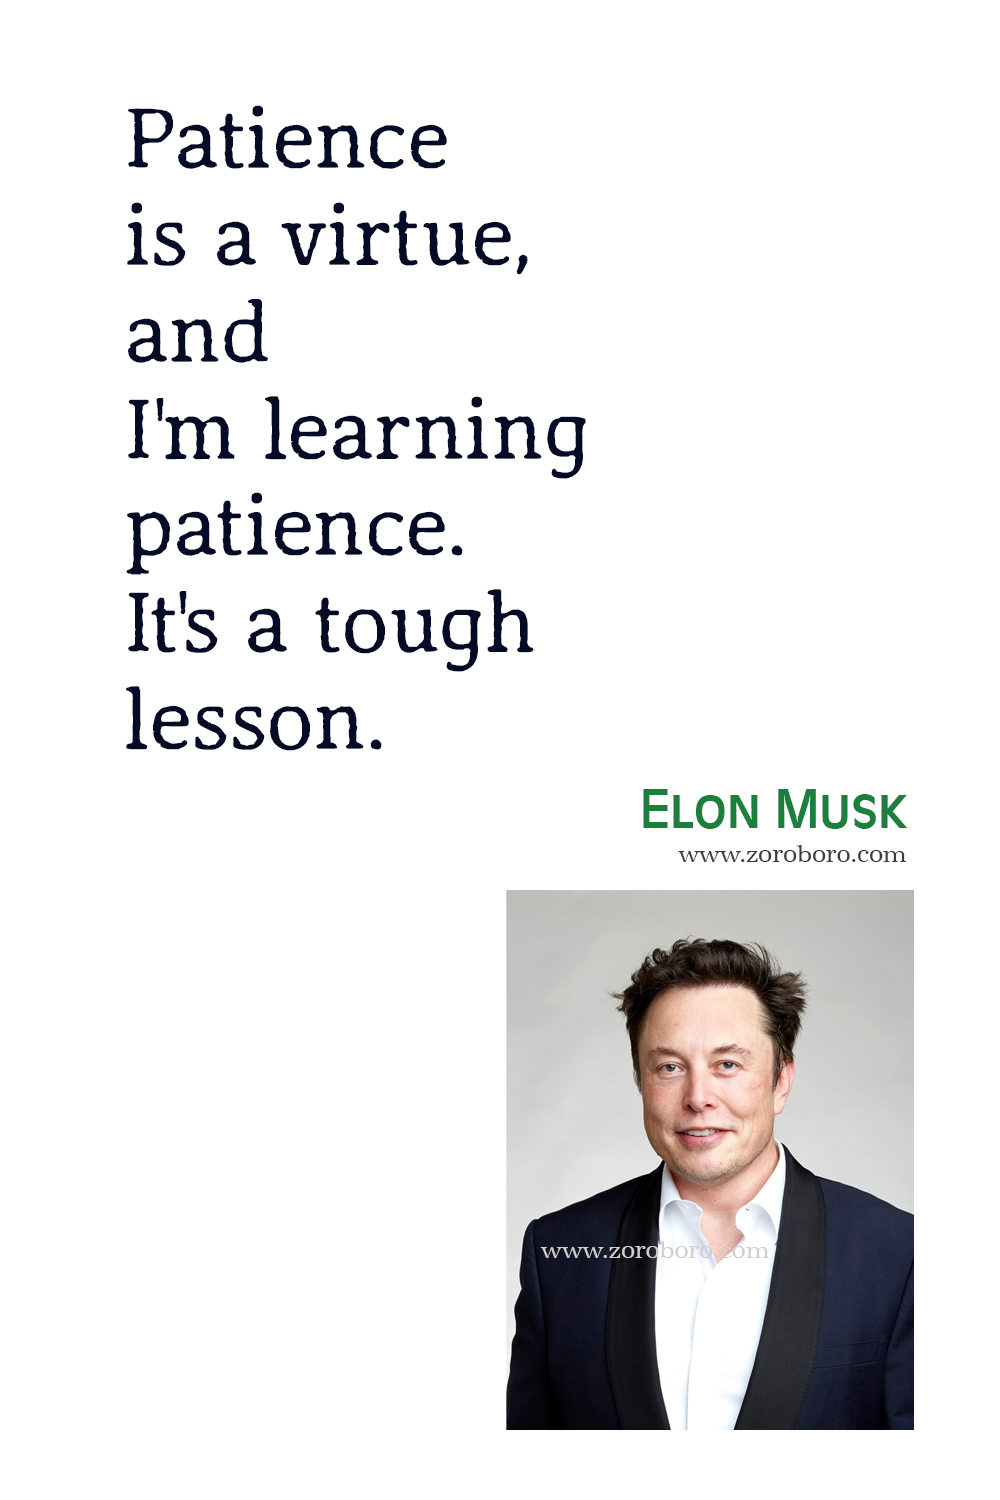 Elon Musk Quotes, Elon Musk Inspirational Quotes, Elon Musk Technology Quotes, Elon Musk: Tesla, SpaceX, and the Quest for a Fantastic Future, Elon Musk .